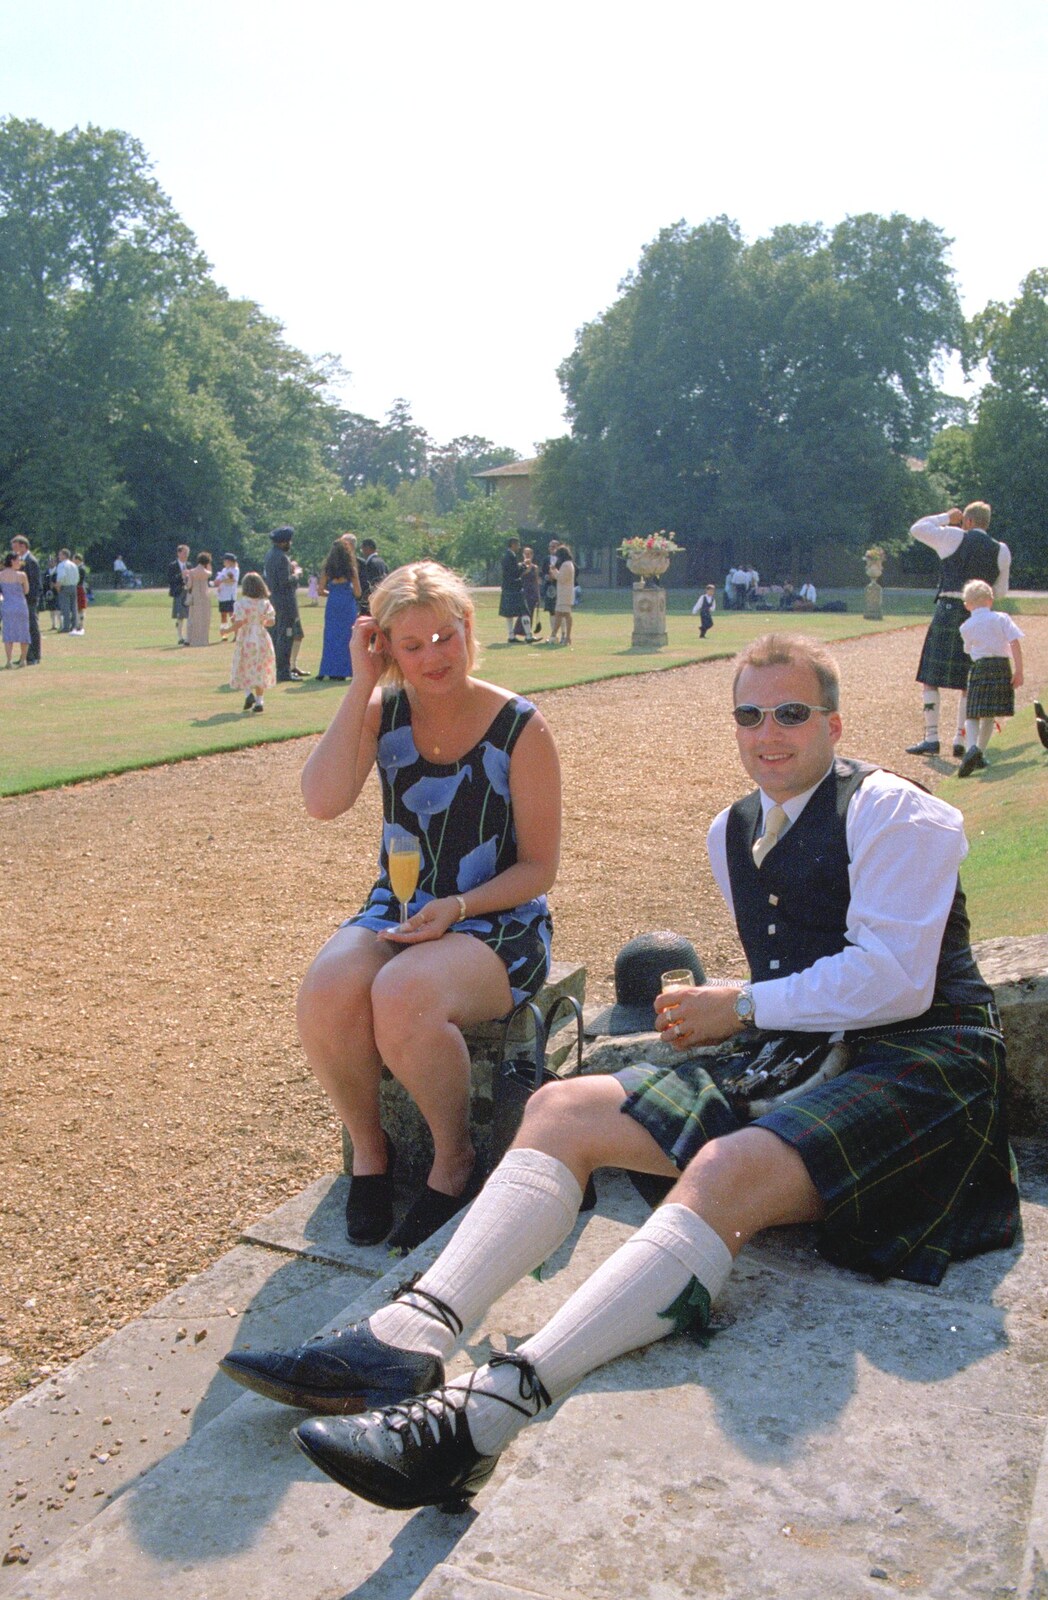 Hamish and Jane's Wedding, Canford School, Wimborne, Dorset - 5th August 1998: Martin and his girlfriend